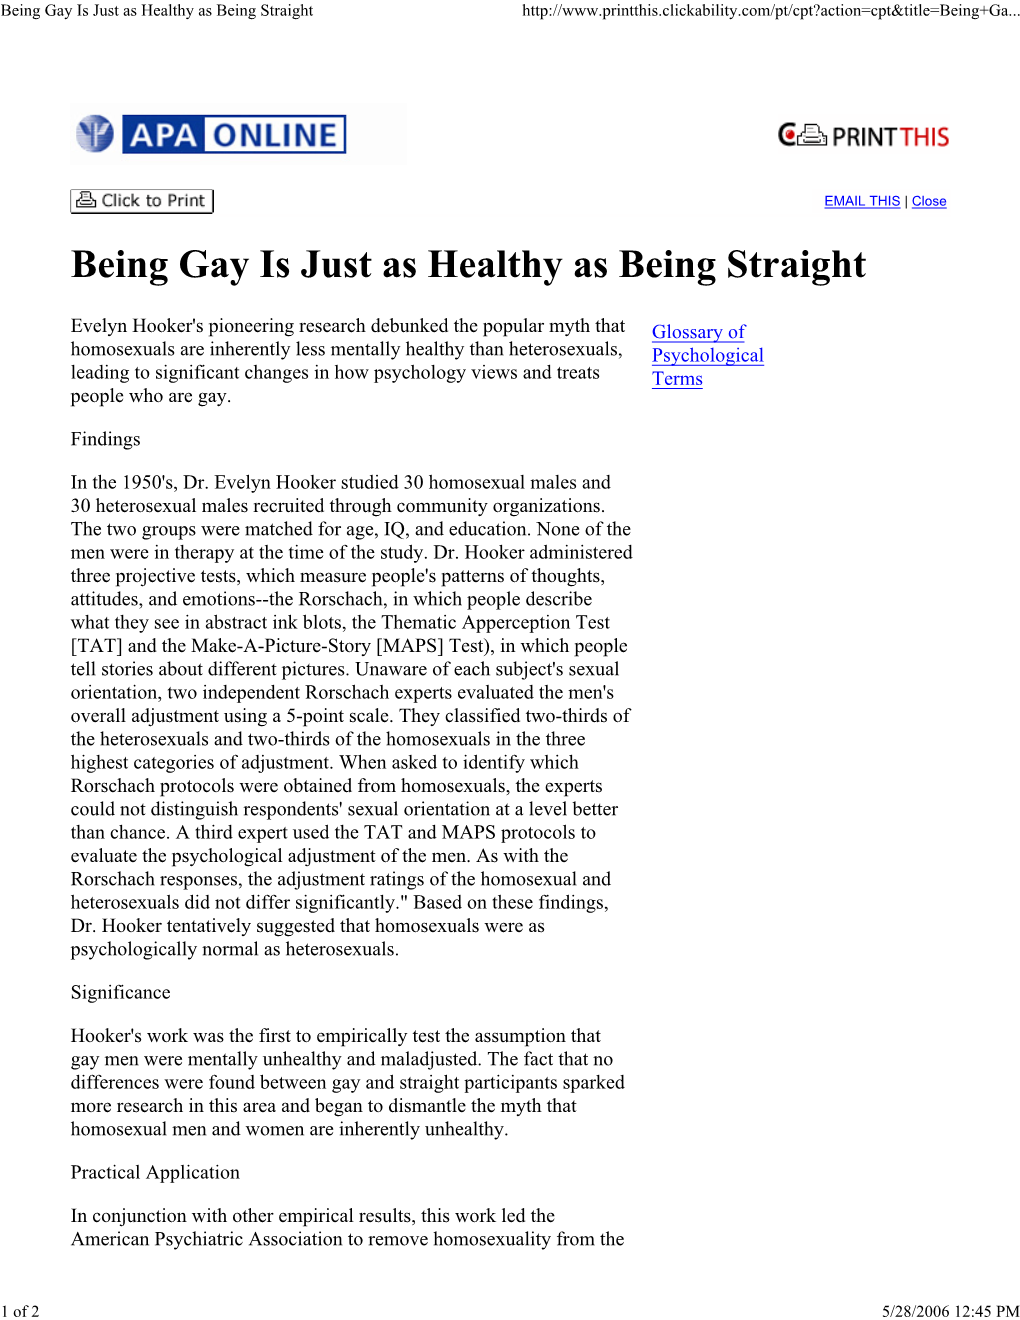 Being Gay Is Just As Healthy As Being Straight